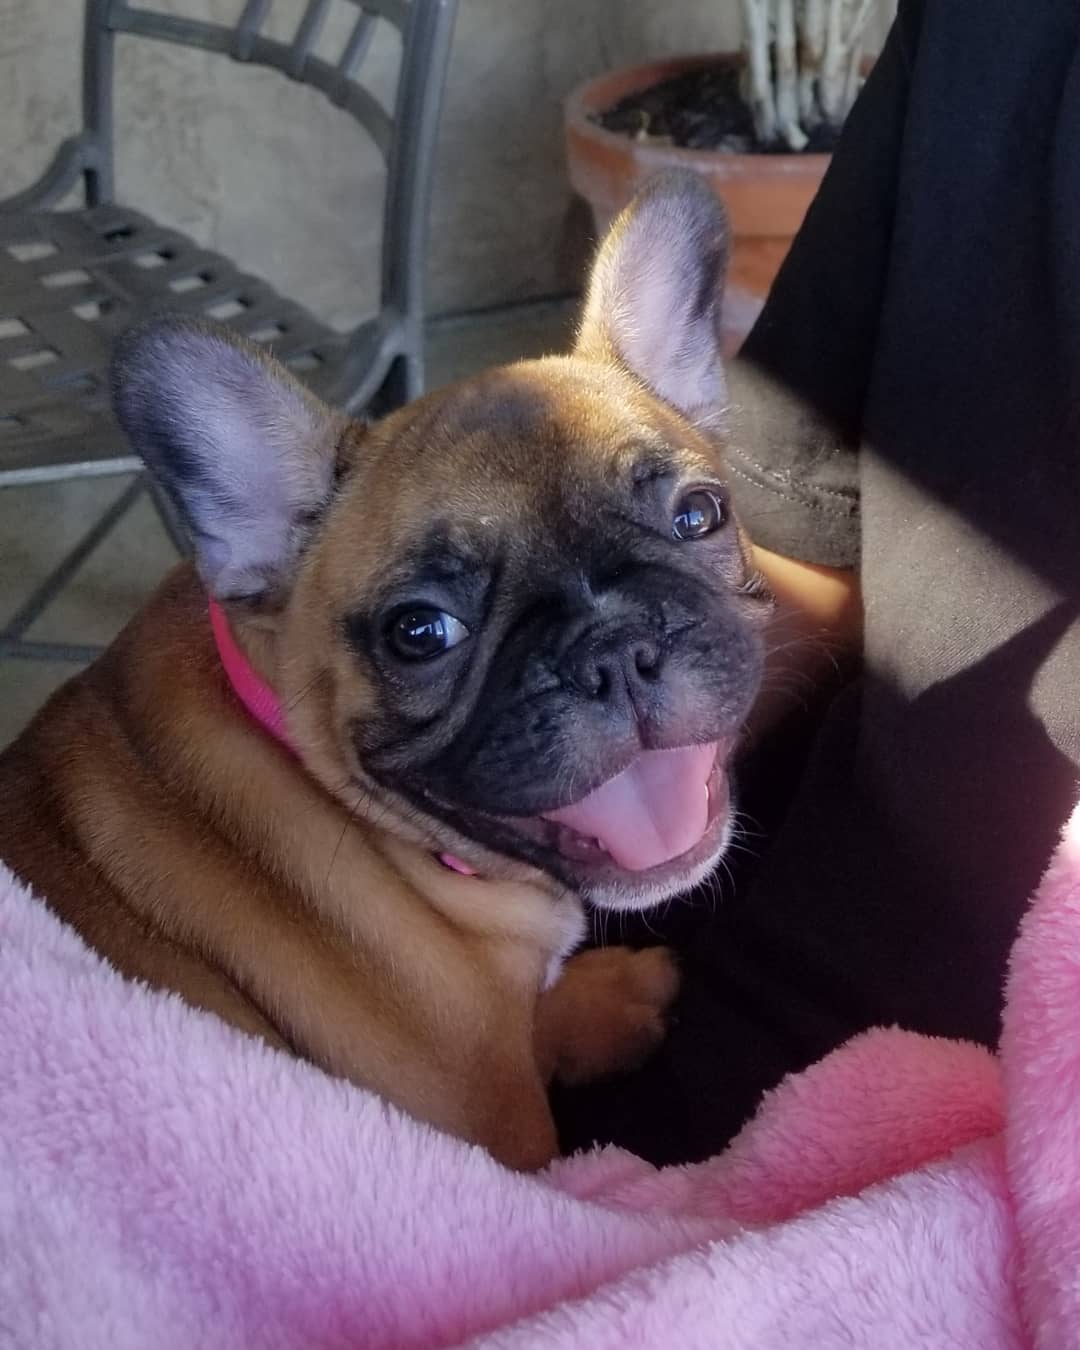 A French Bulldog sitting on the lap of a person while smiling